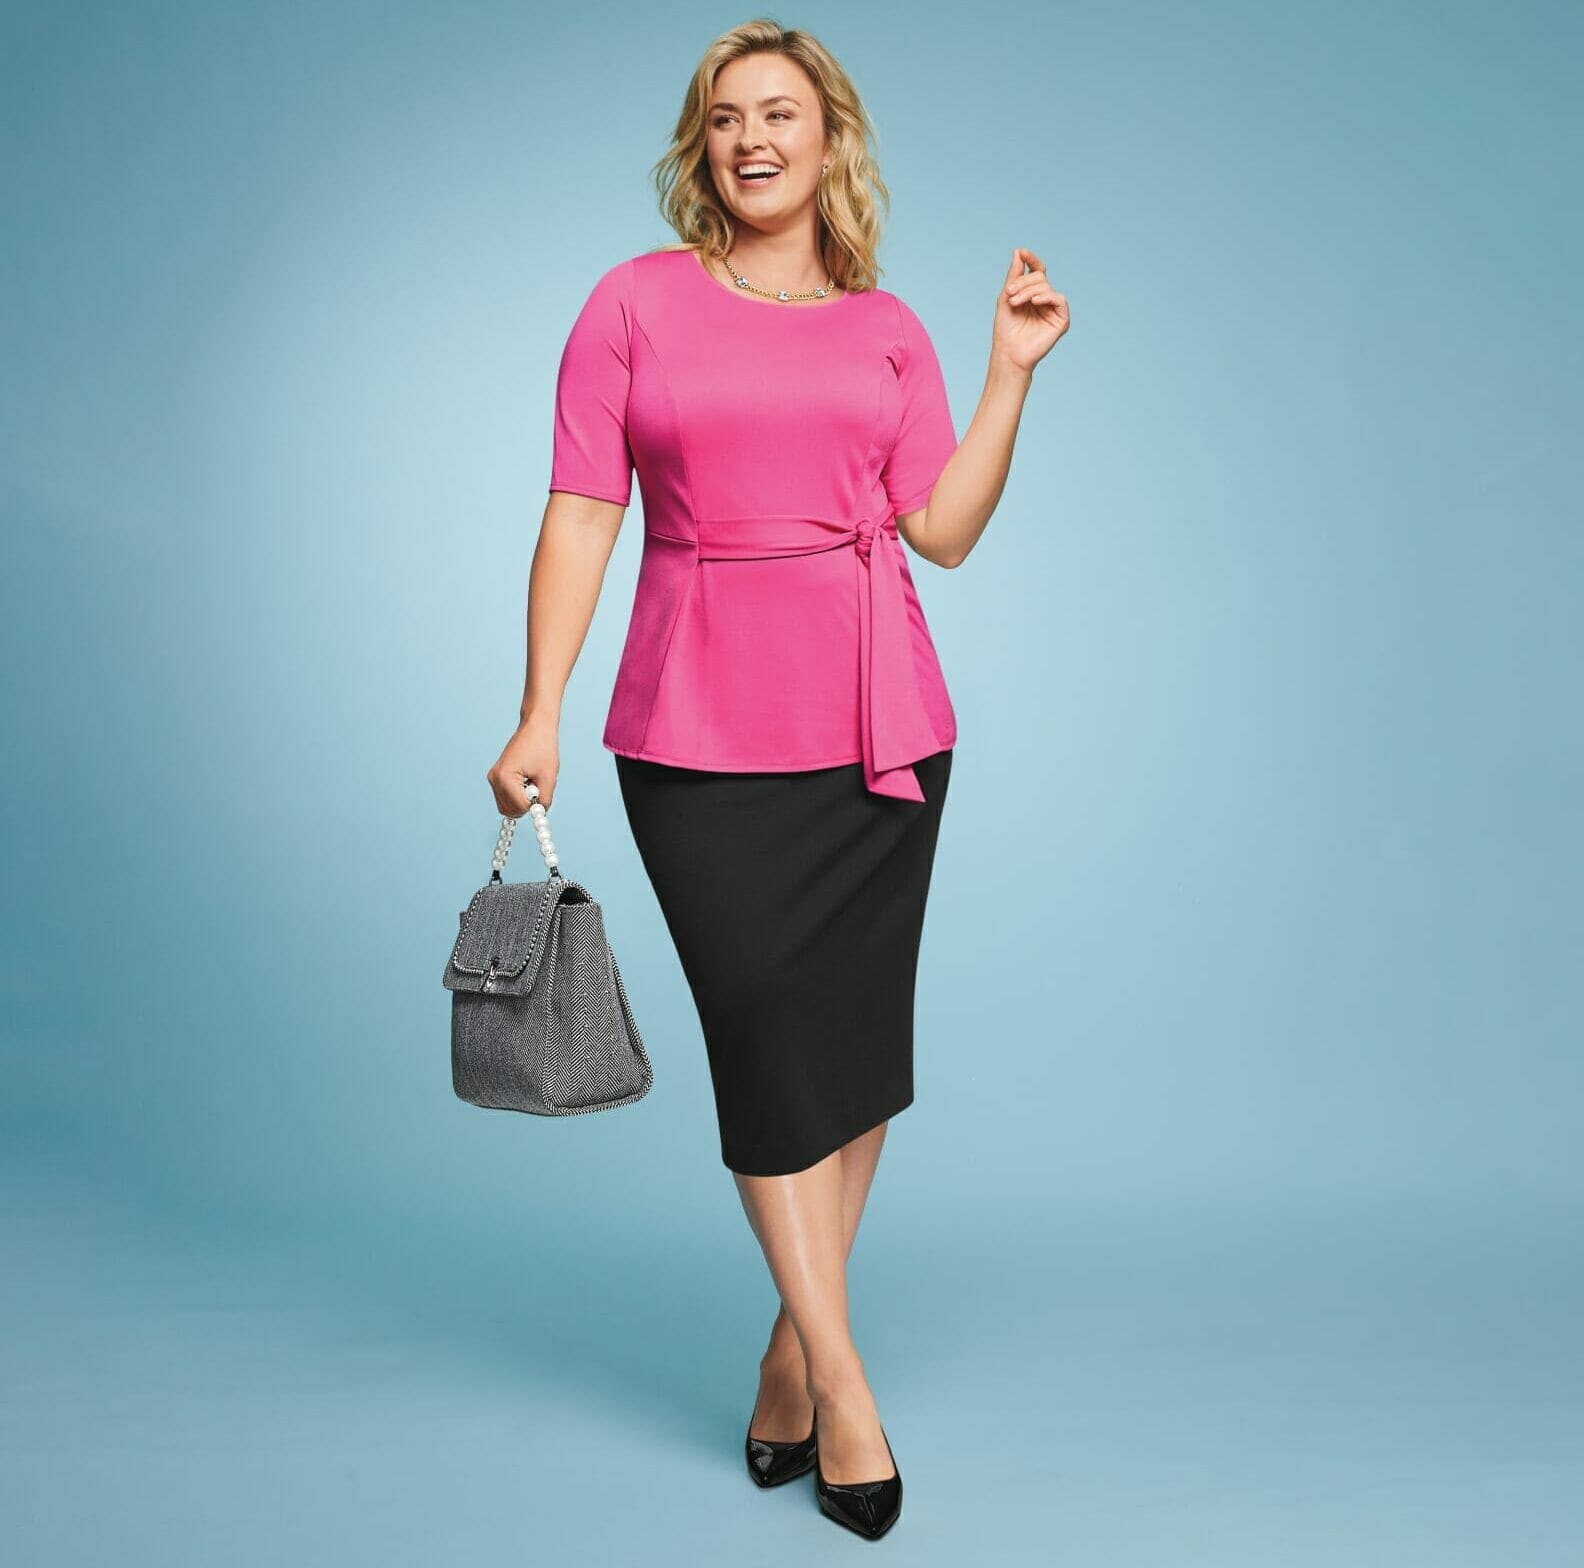 Plus size model wearing a pink top with a black skirt